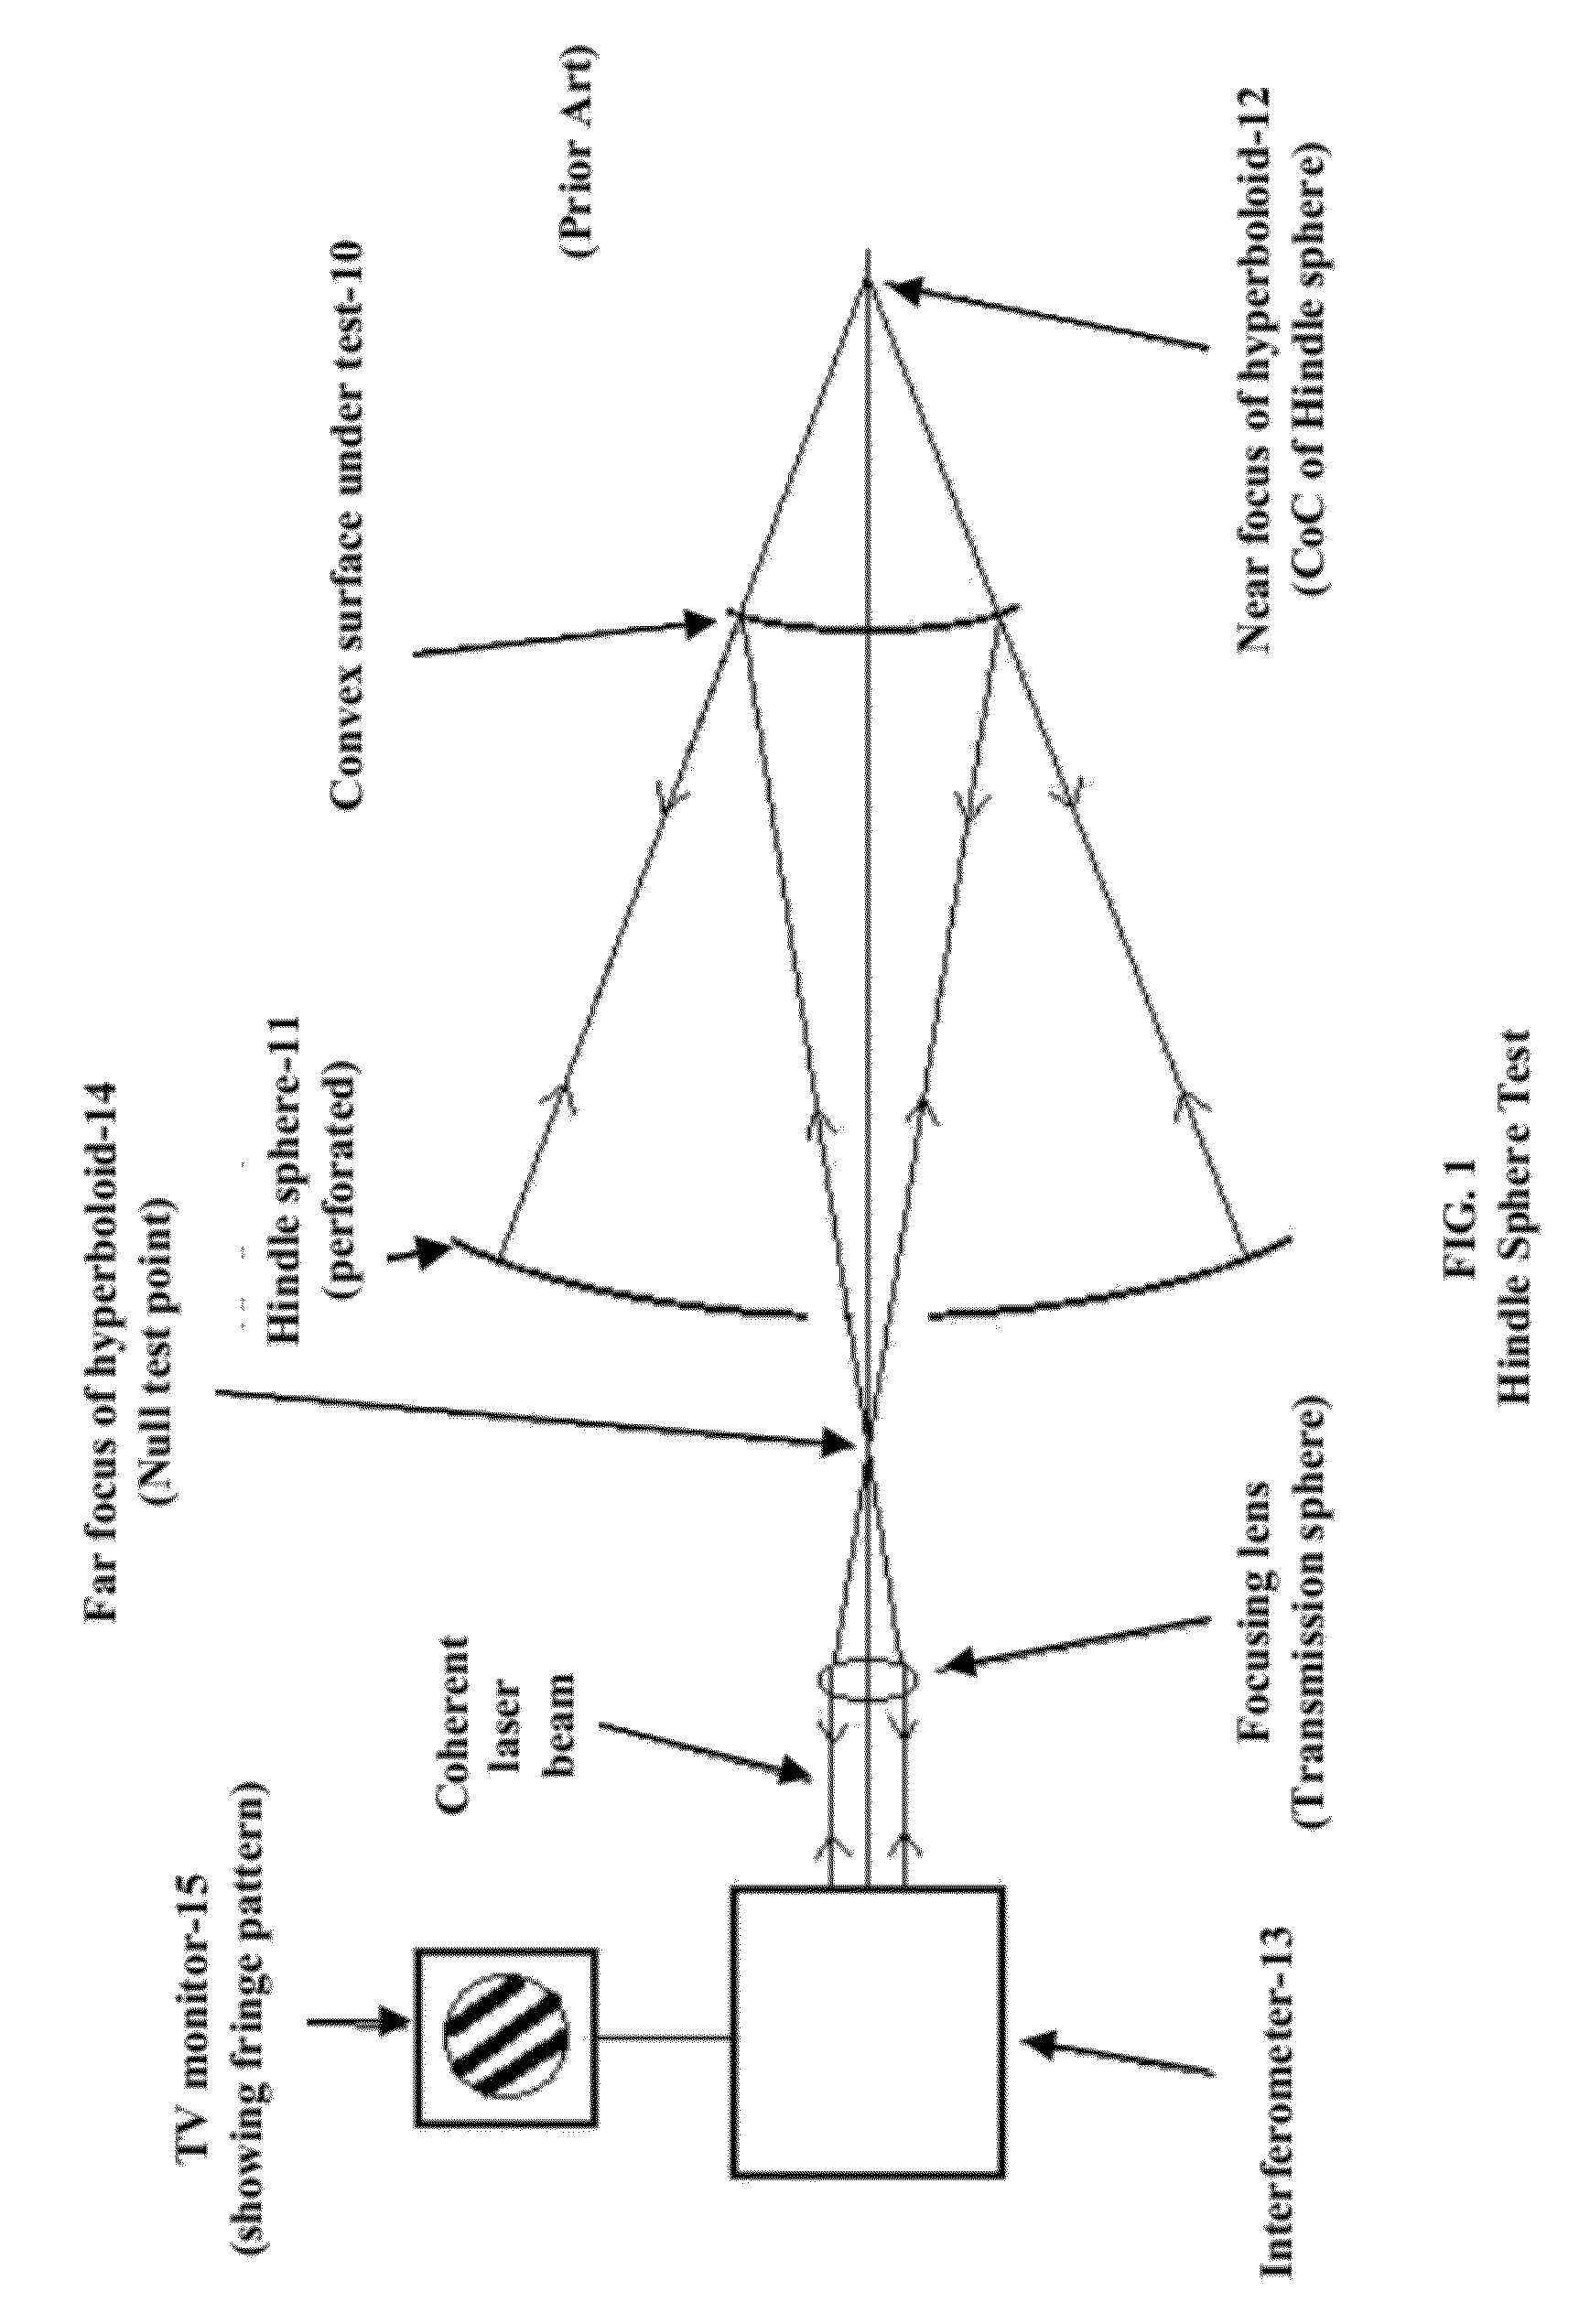 Surface Figure Test Method For Large Convex Optical Surfaces